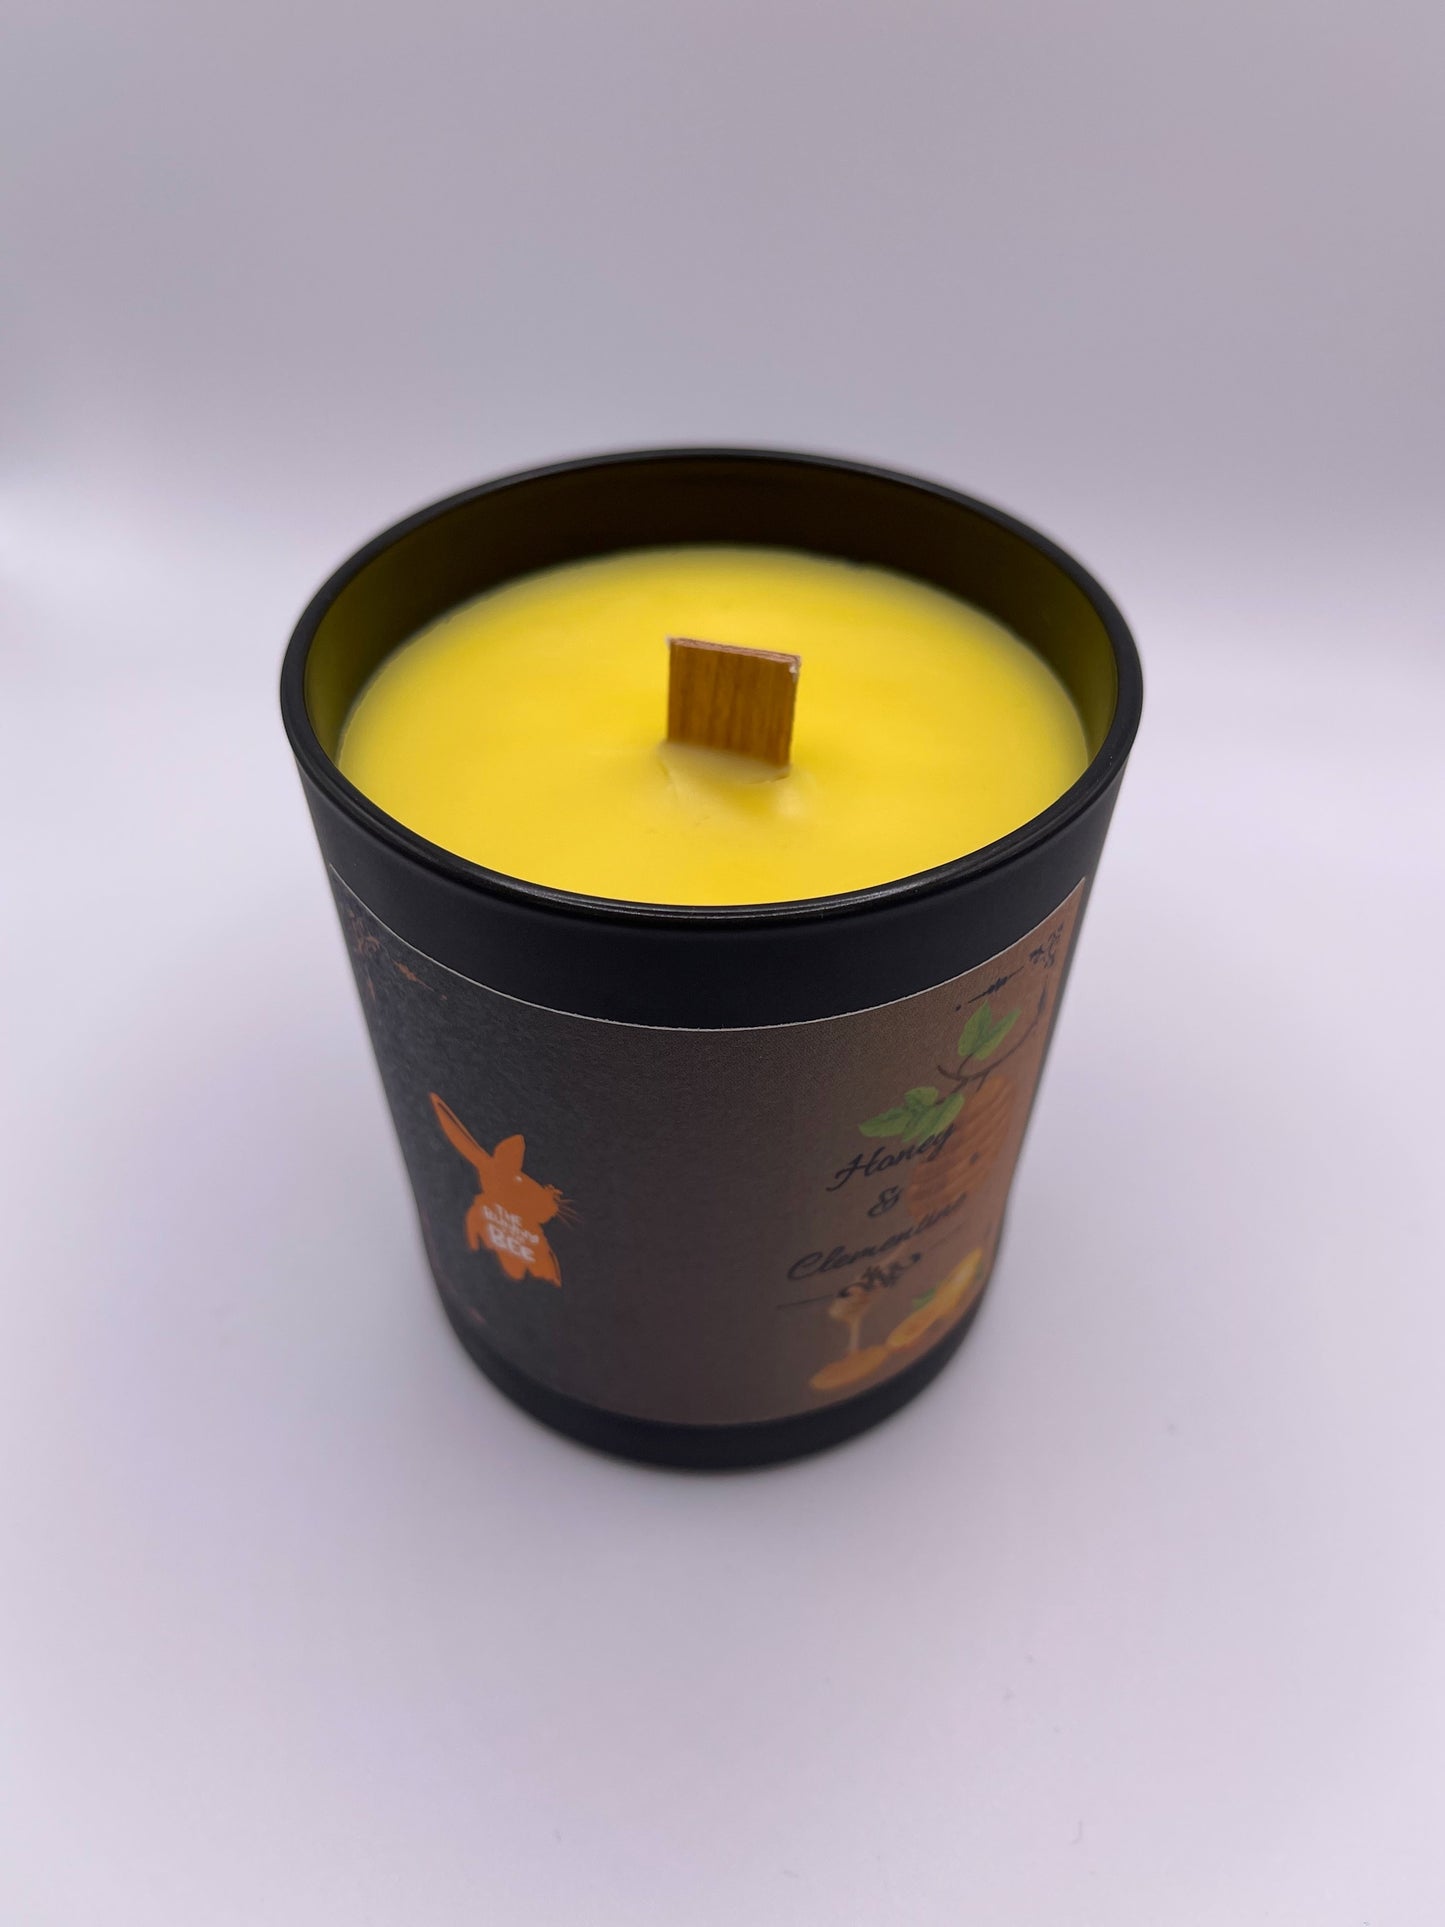 Honey & Clementine Candle